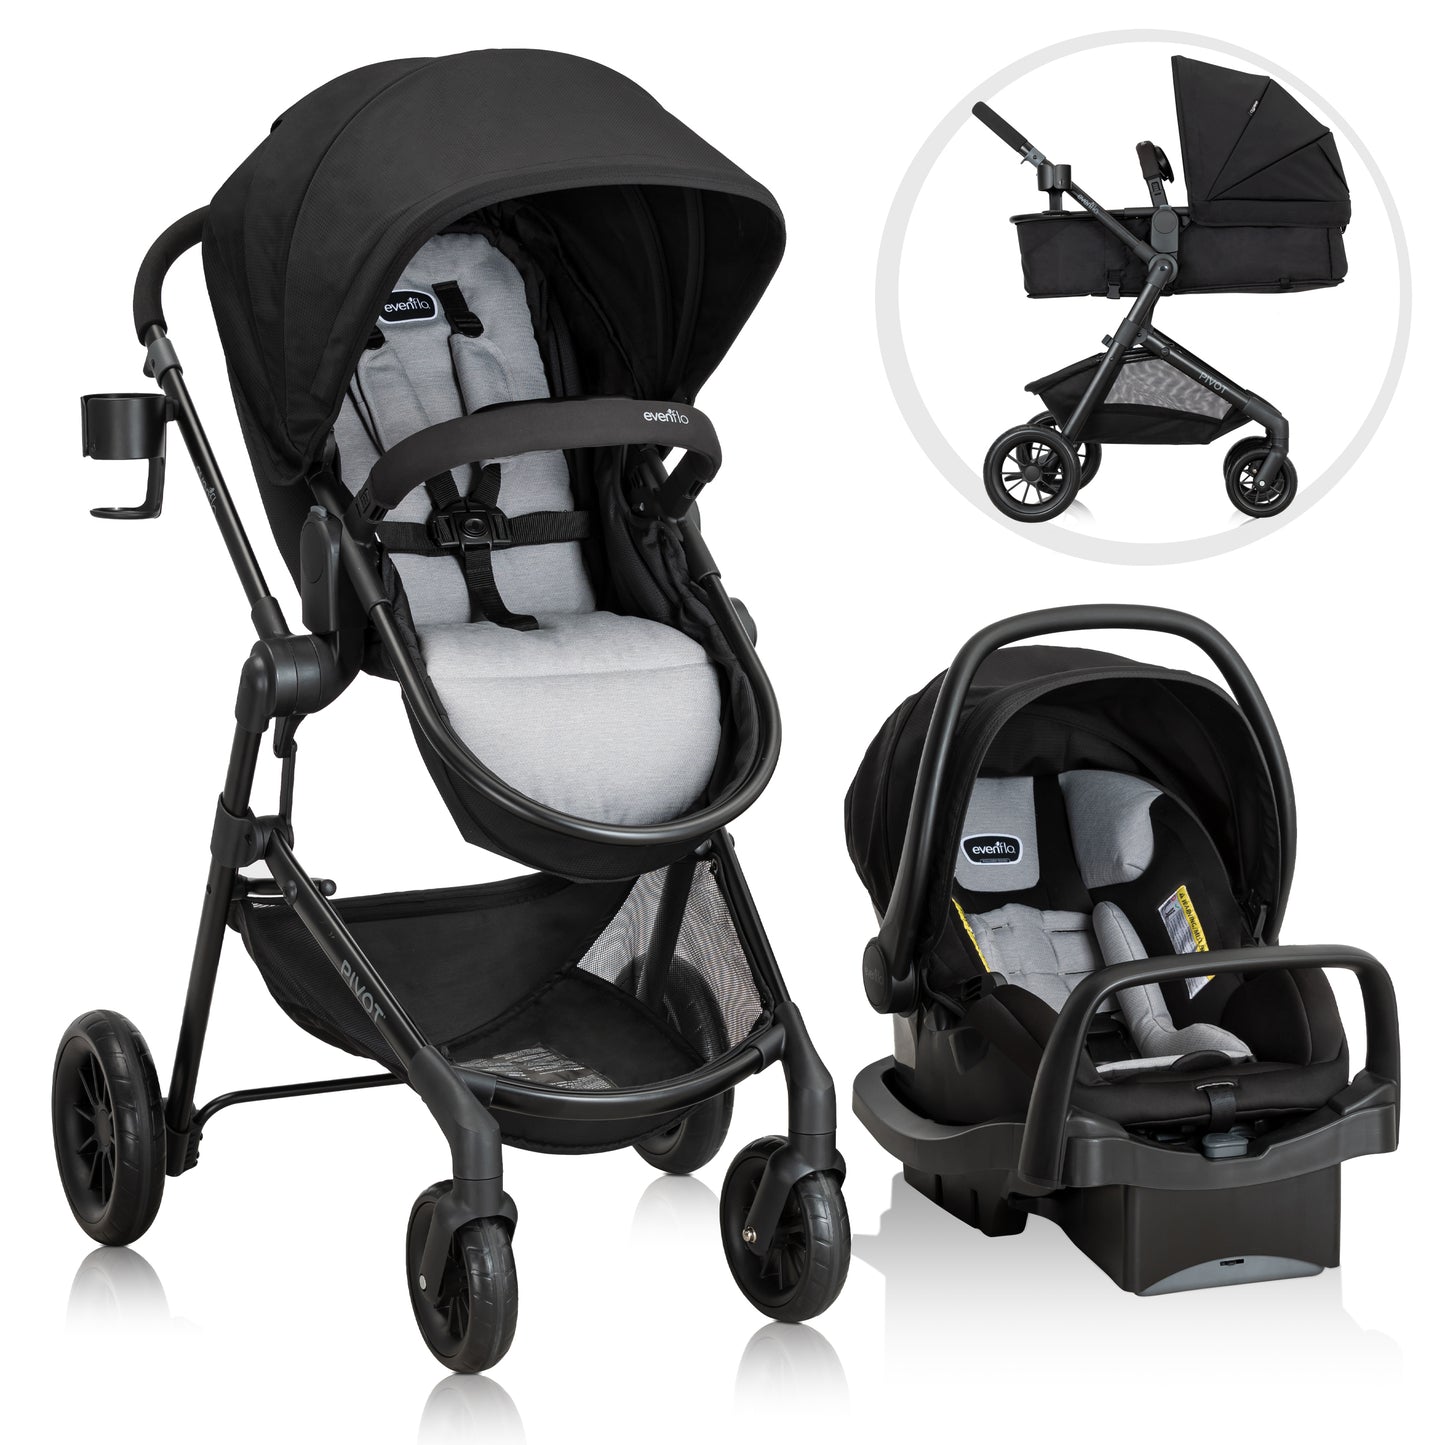 Pivot Modular Travel System with LiteMax Infant Car Seat with Anti-Rebound Bar Support